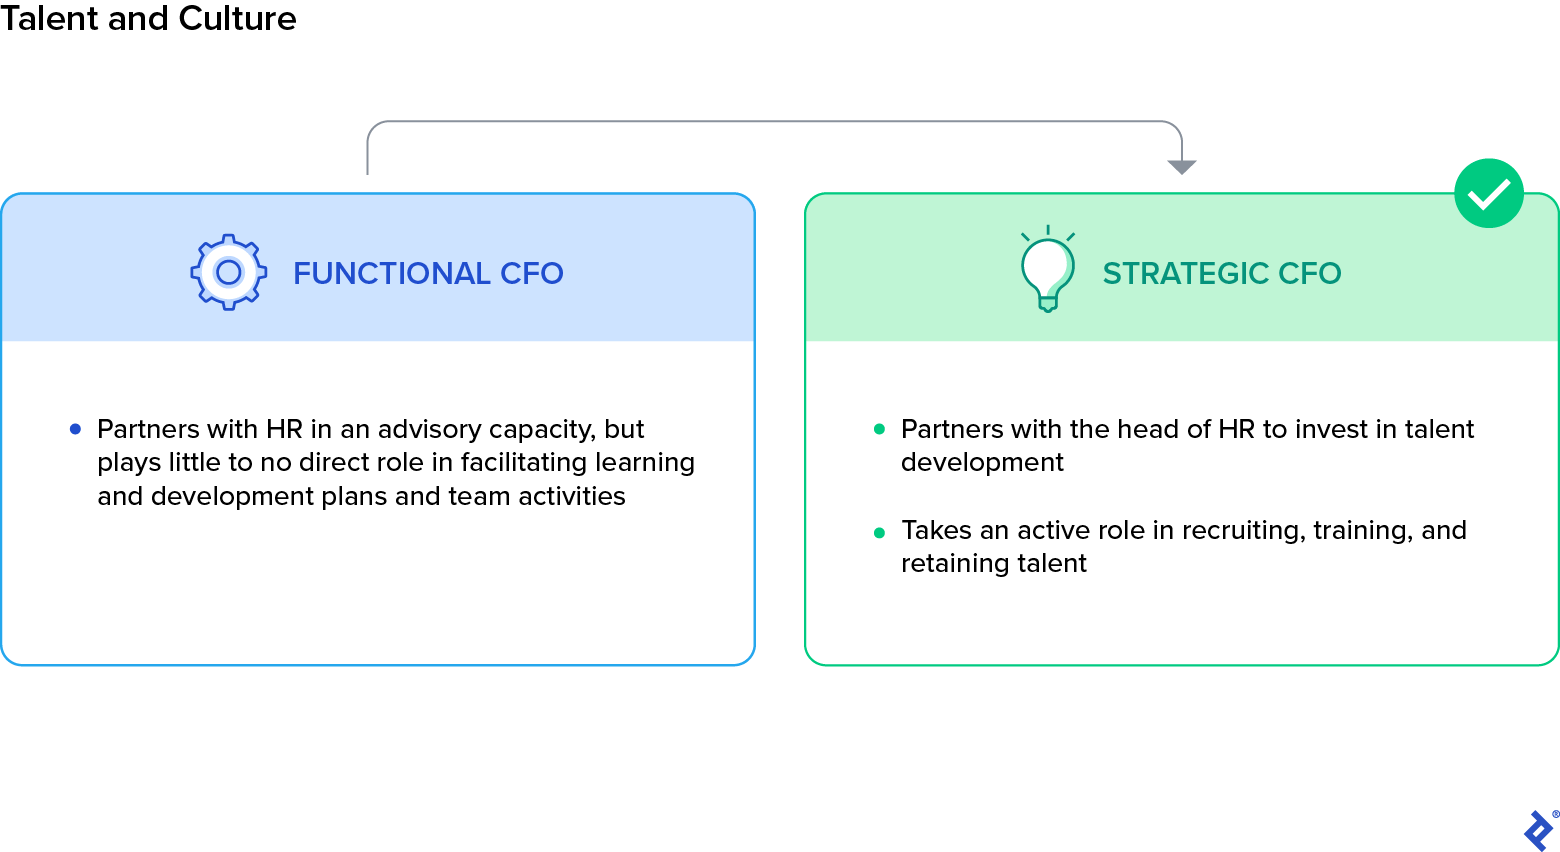 The functional CFO partners with HR in an advisory capacity, but plays little to no direct role in facilitating learning and development plans and team activities. The strategic CFO partners with the head of HR to invest in talent development and takes an active role in recruiting, training, and retaining talent.